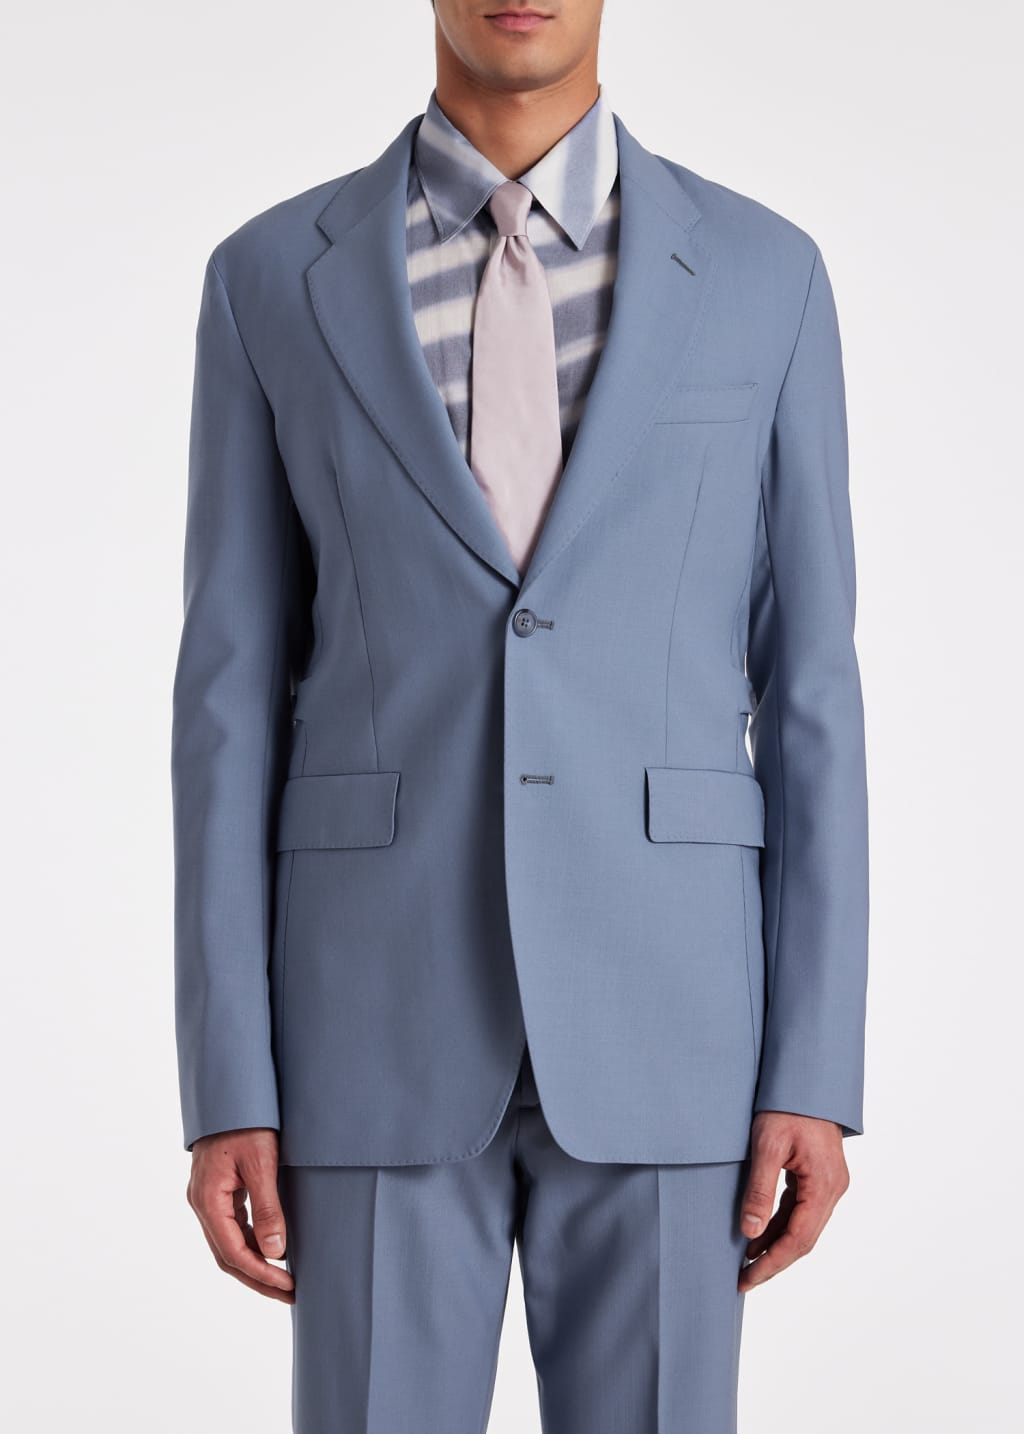 Model View - Men's Tailored-Fit Fresco Wool Suit by Paul Smith